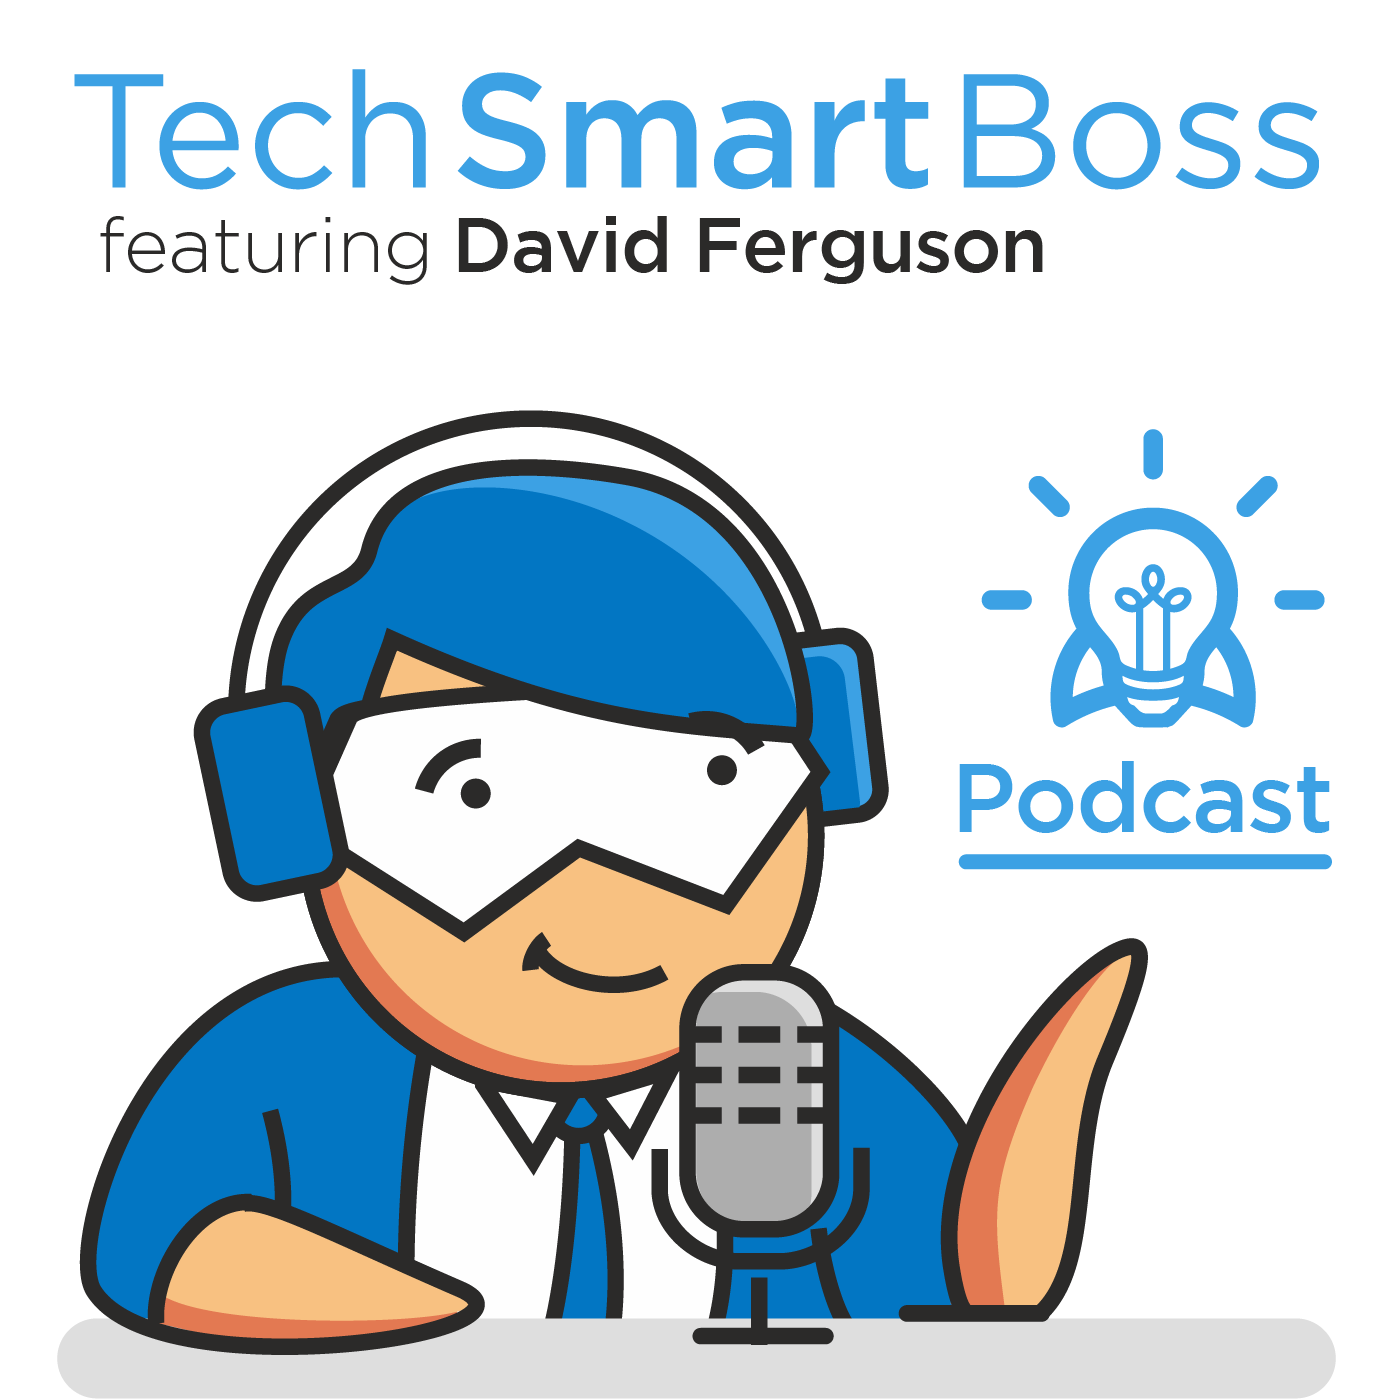 Episode 92: 5 Keys To Managing Your Business Expenses (The Tech Smart Boss Way)